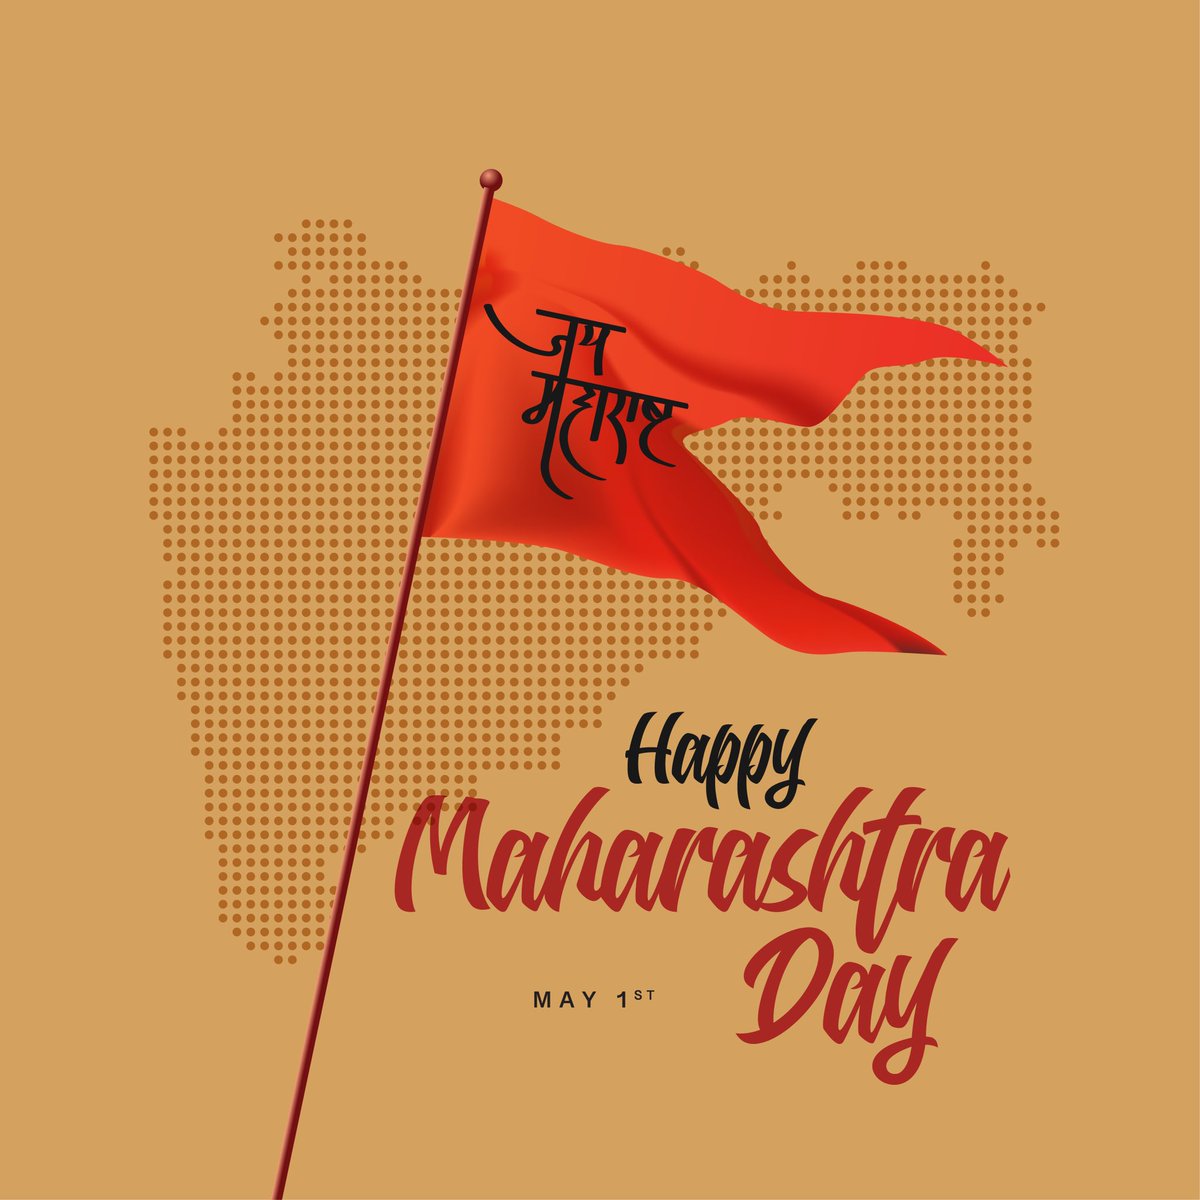 My best wishes on foundation day of the state of Maharashtra and Gujarat. May the 2 states continue to be a shining example of progress and prosperity.
#MaharashtraDay #GujaratDay